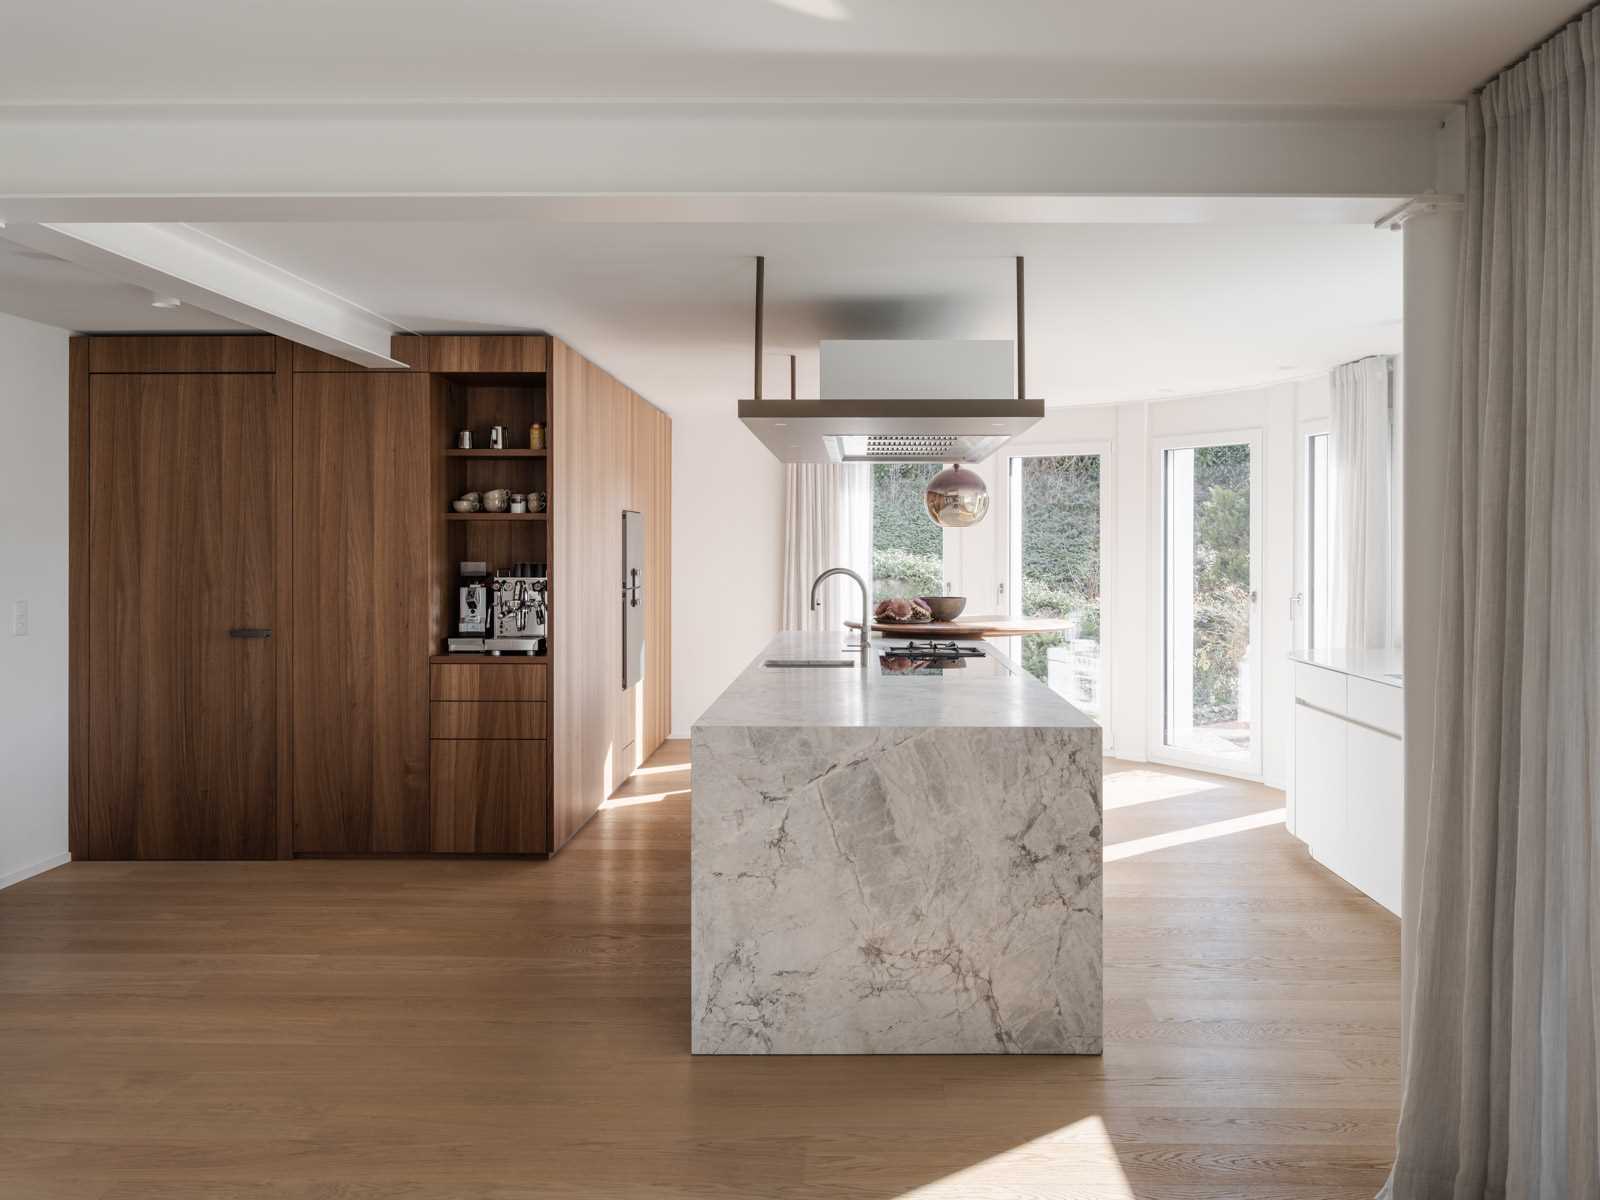 A modern kitchen with wood cabinets, wood floors, and a long kitchen island with a stone waterfall countertop.